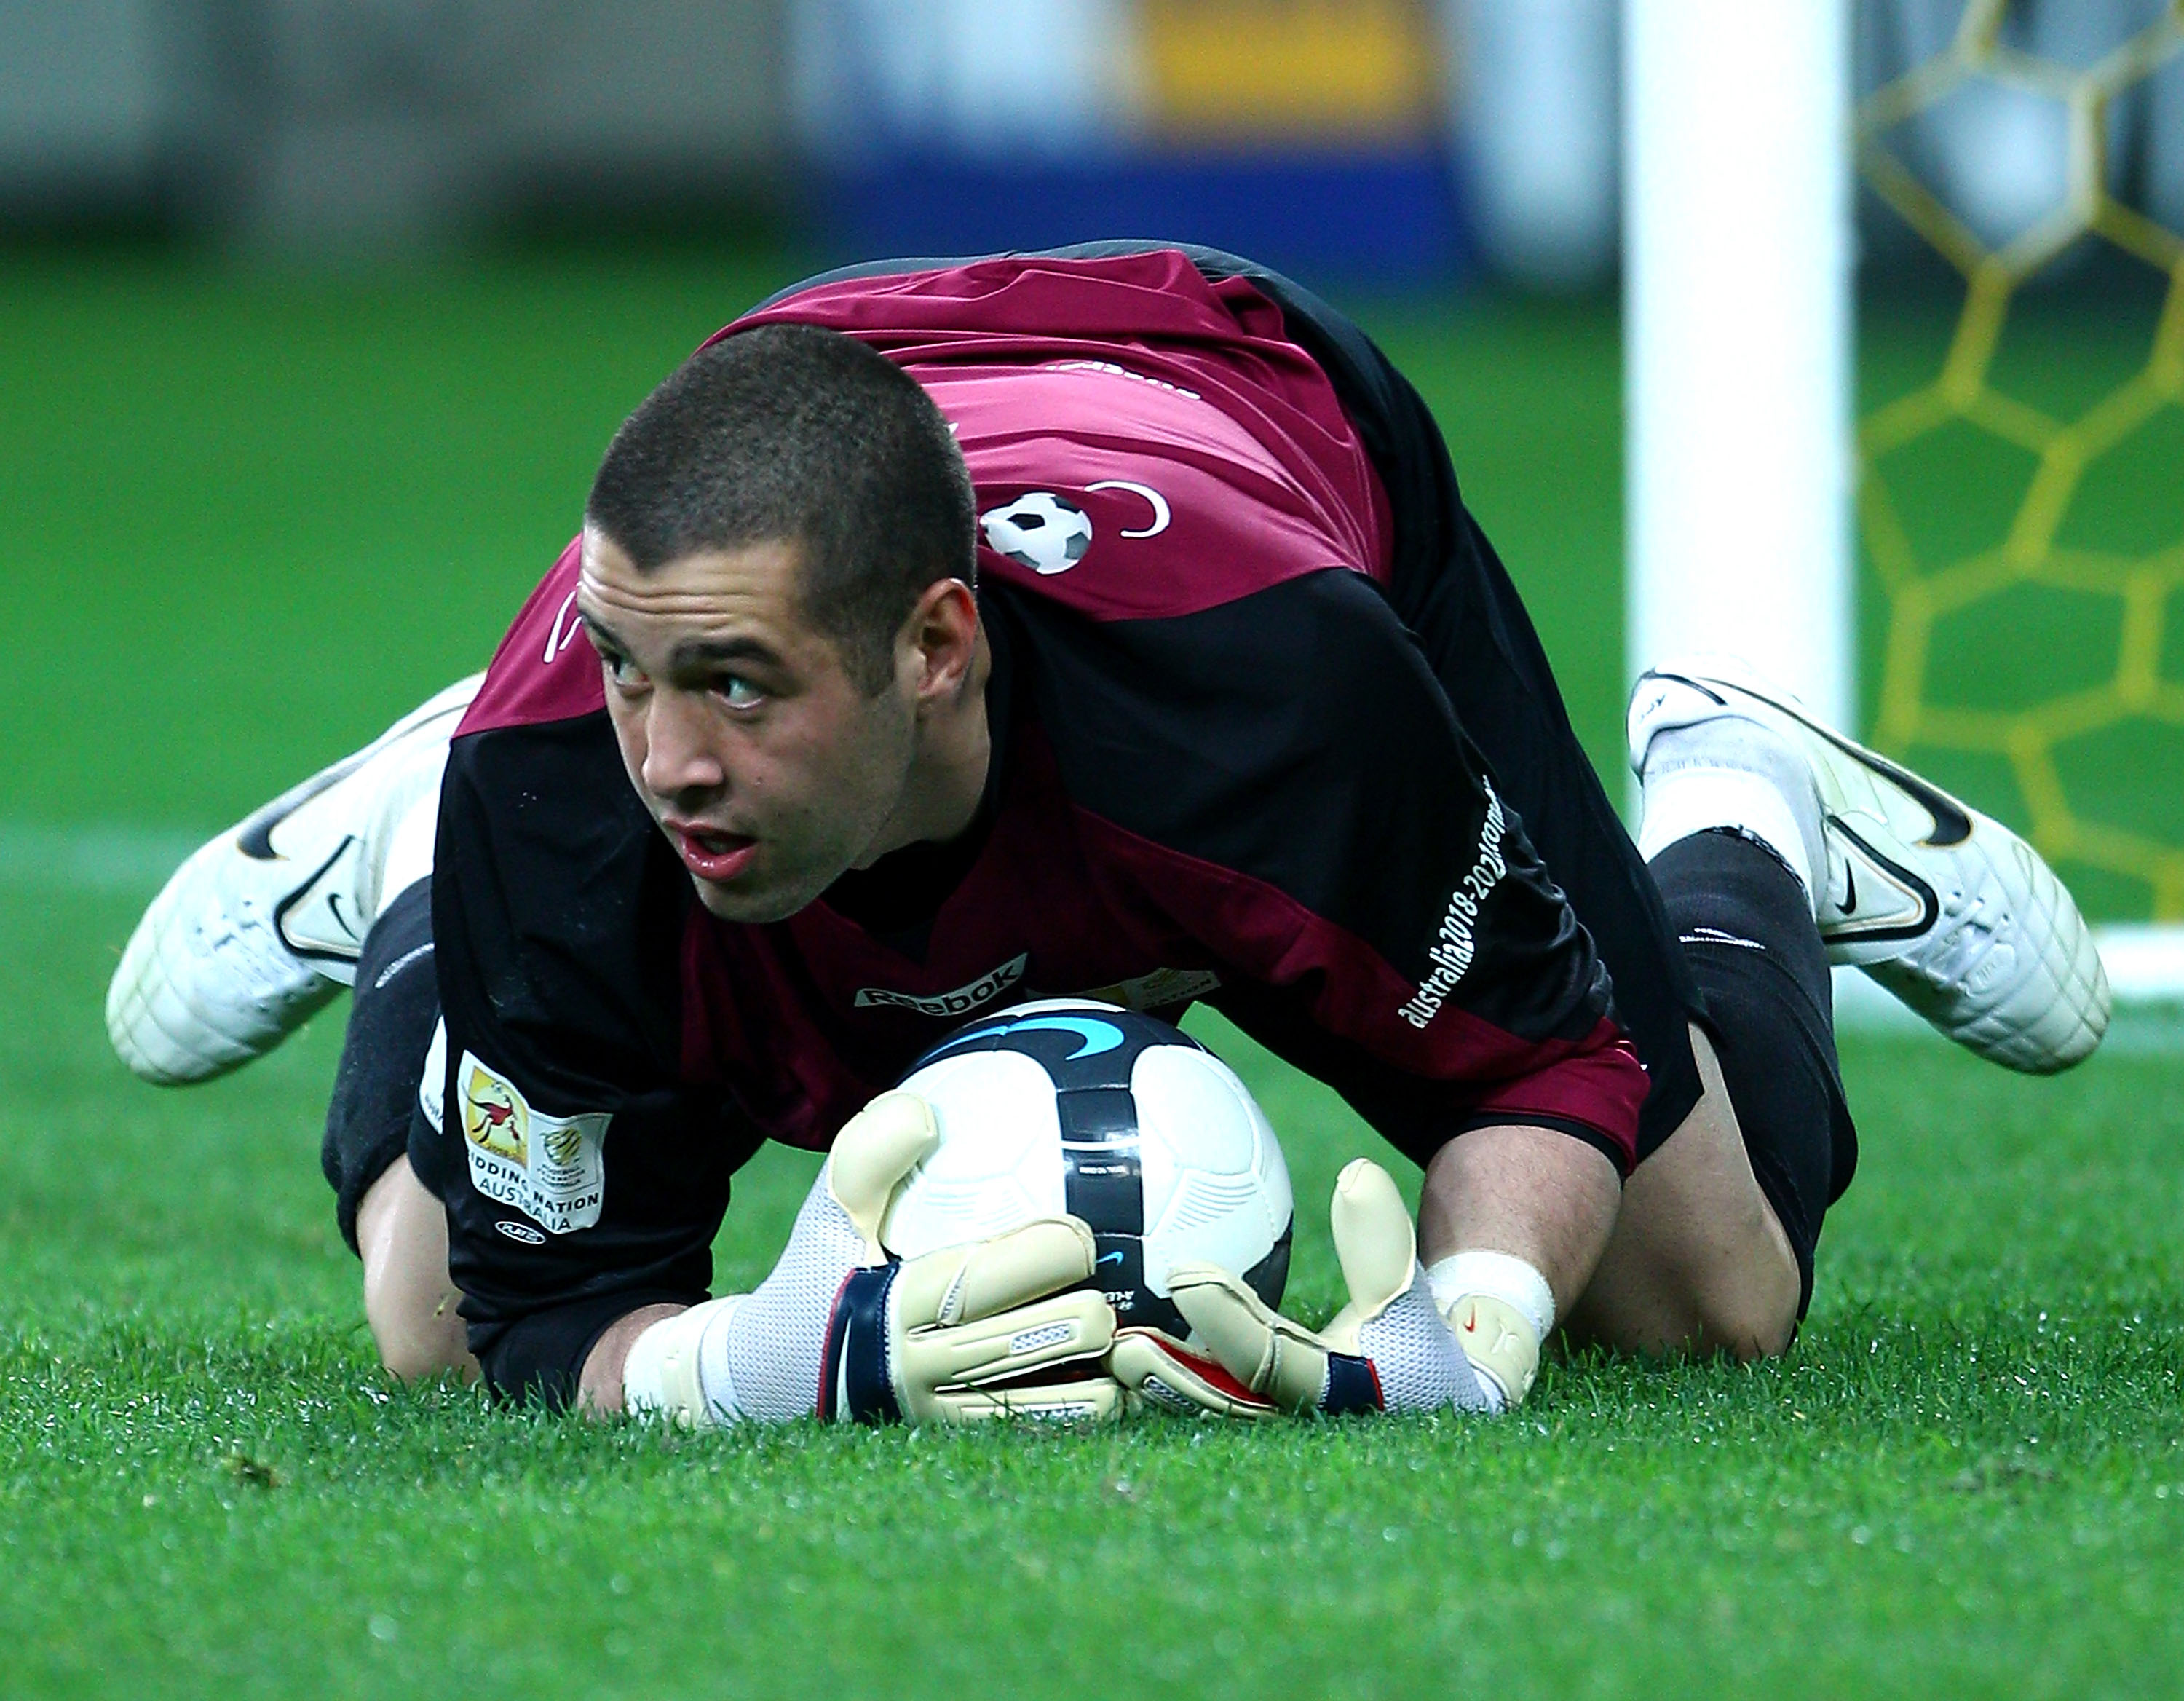 MELBOURNE, AUSTRALIA - MAY 14:  Dean Bouzanis of the Come Play XI makes a save during the Kevin Muscat Testimonial match between Melbourne Victory and the Come Play XI Squad at AAMI Park on May 14, 2010 in Melbourne, Australia.  (Photo by Mark Dadswell/Ge